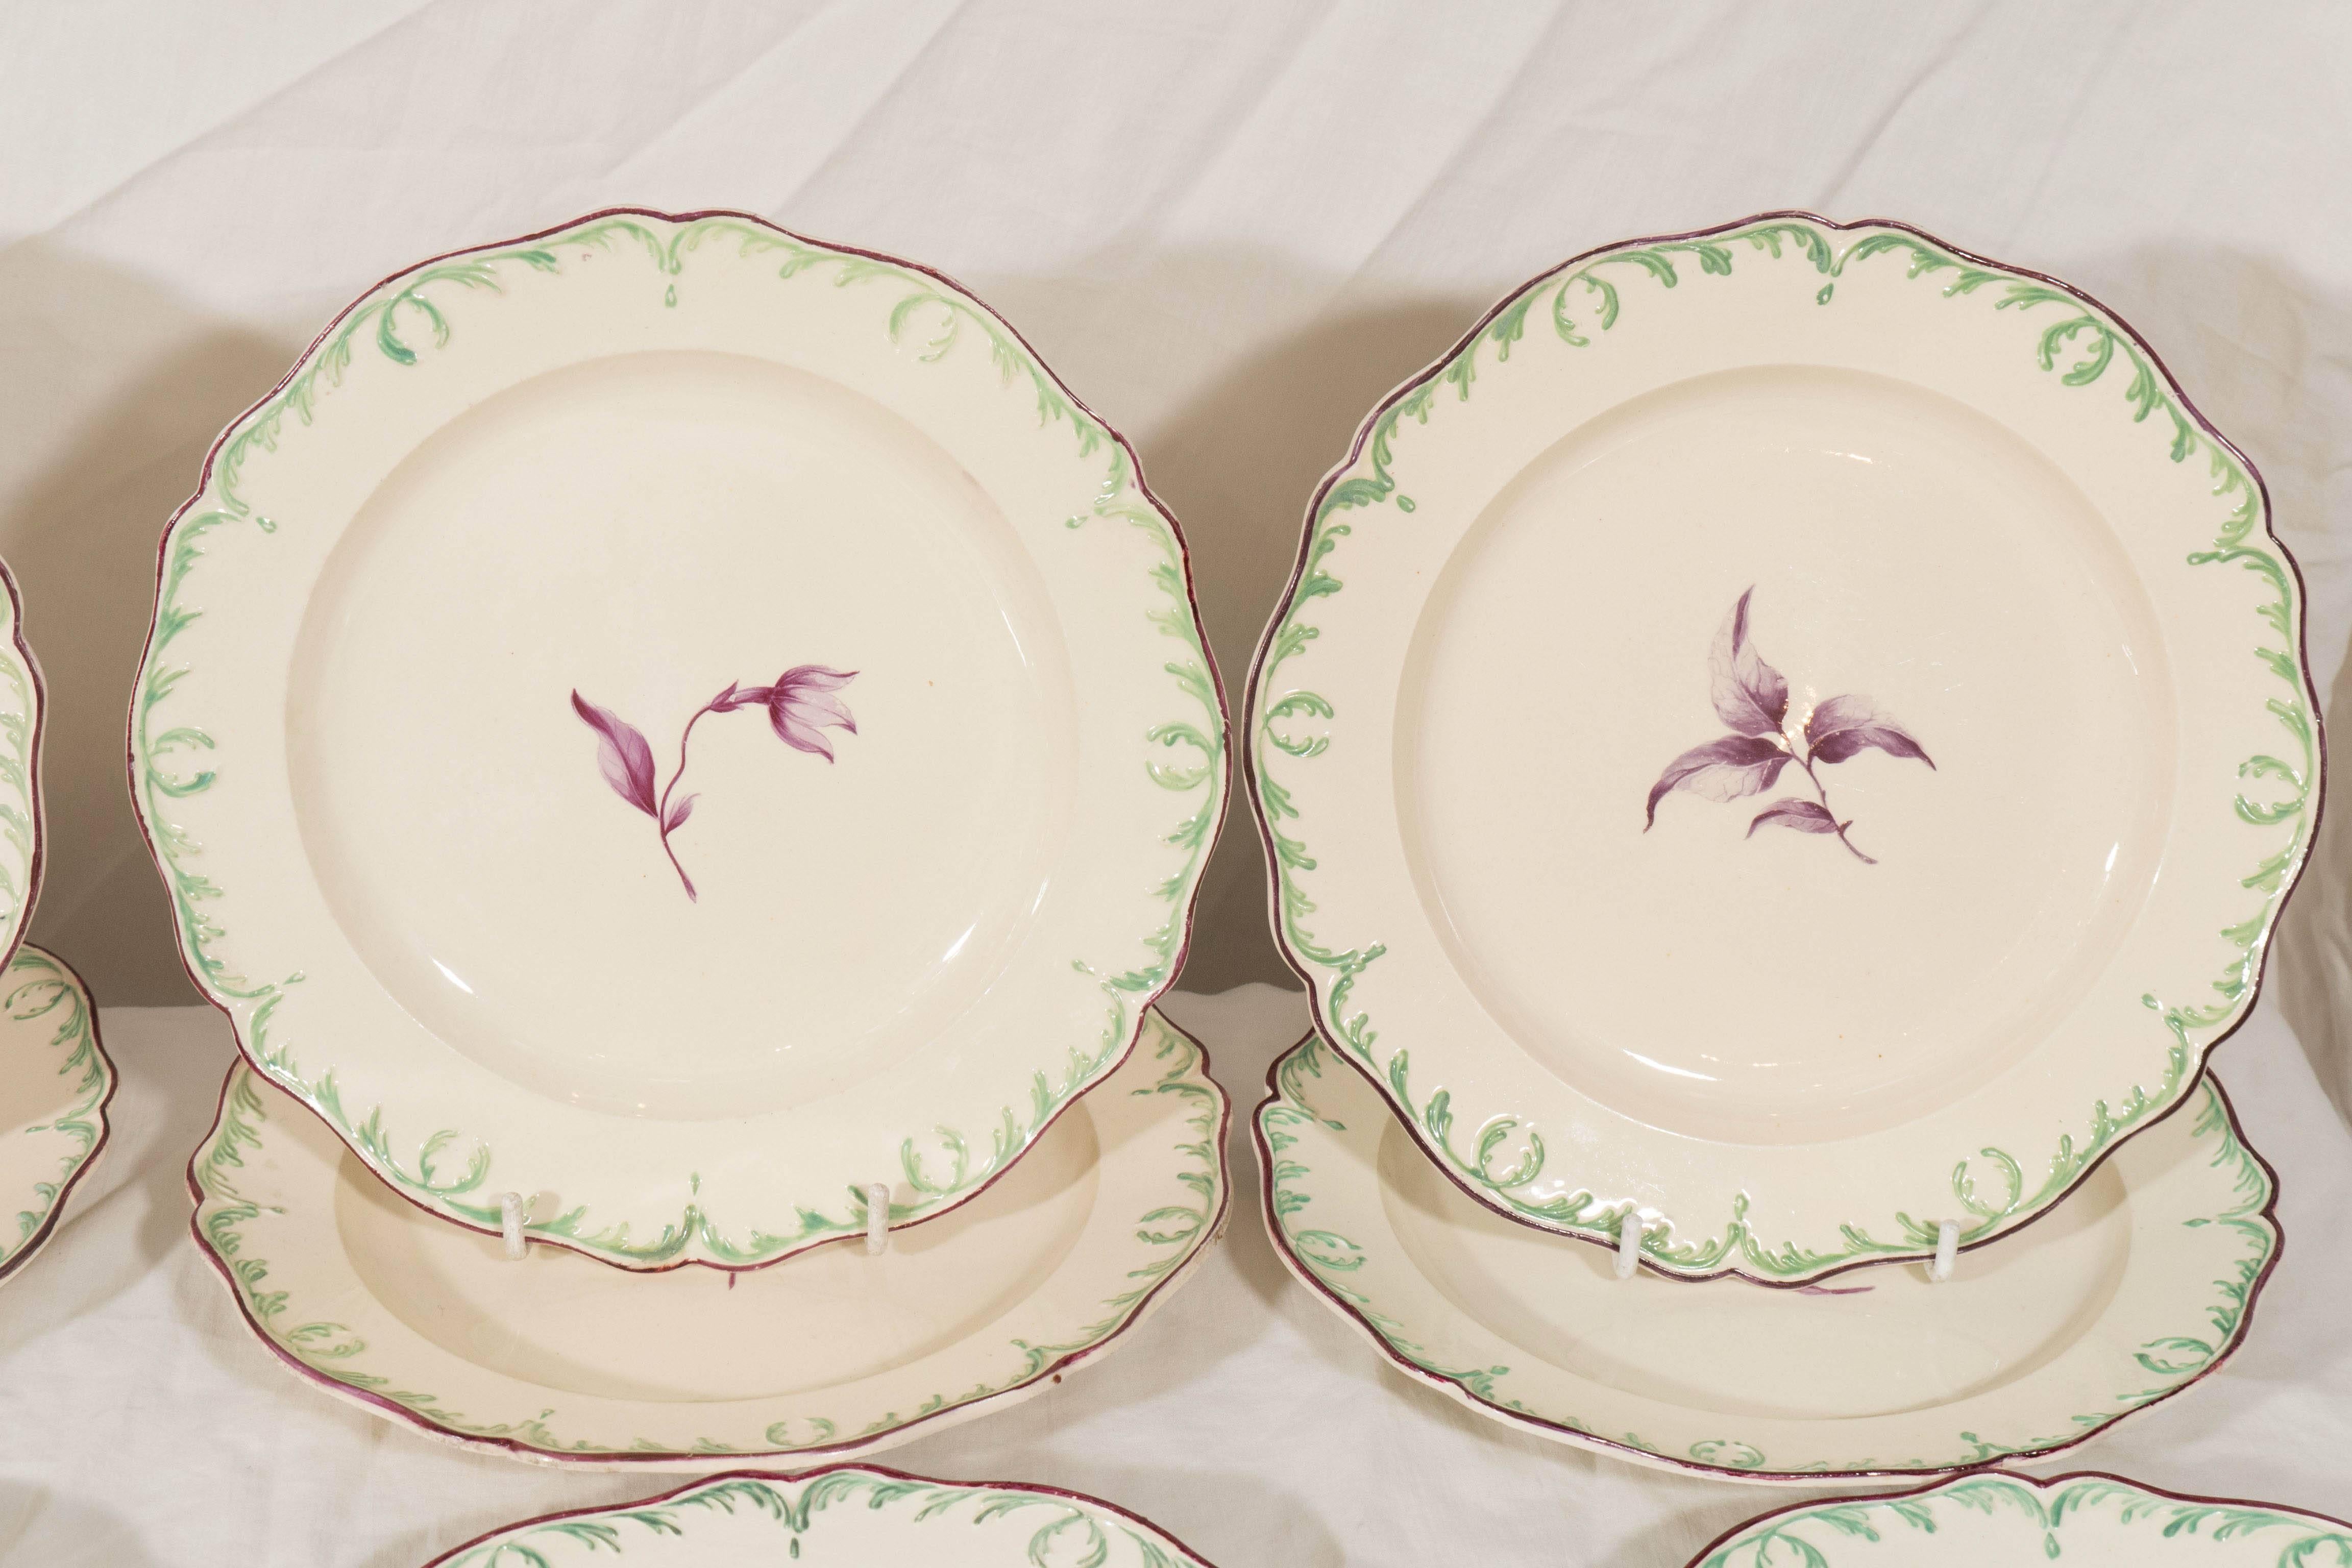 Late 18th Century Antique Wedgwood Creamware Dishes18th Century with a Green Feather Edge